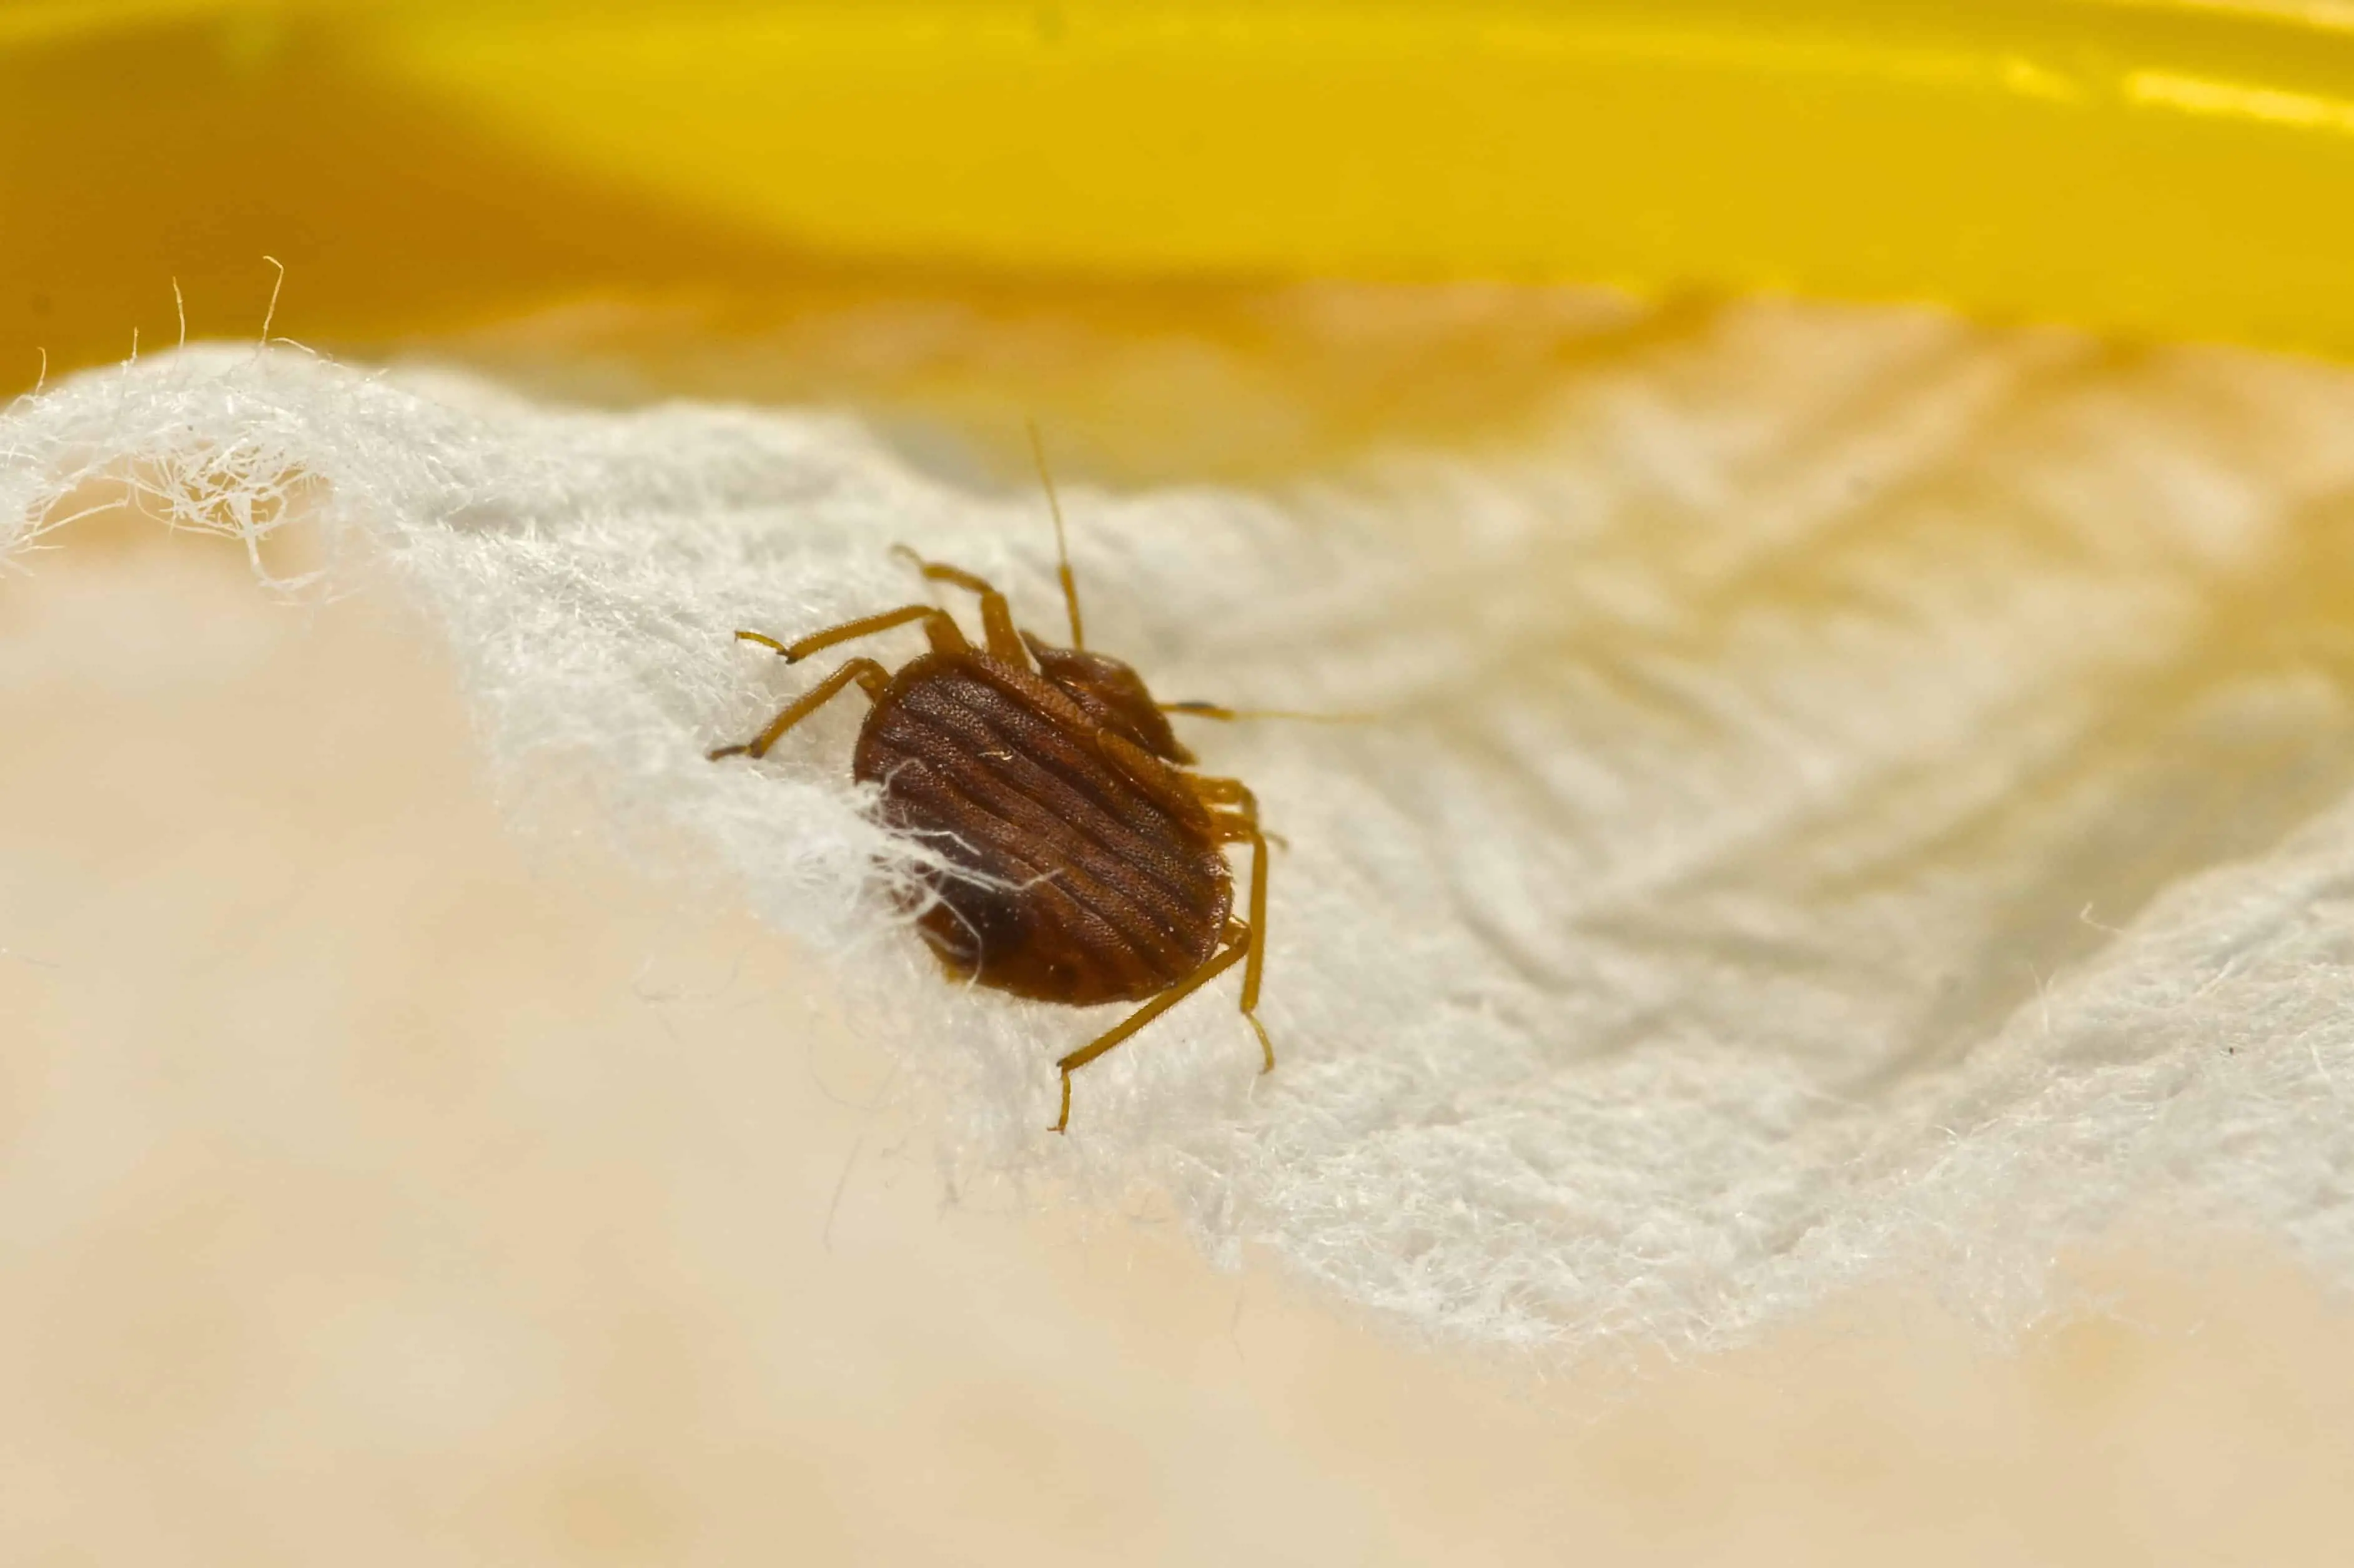 Baby Bed Bugs: Bites, Images, size, Life cycle, Complete Guide